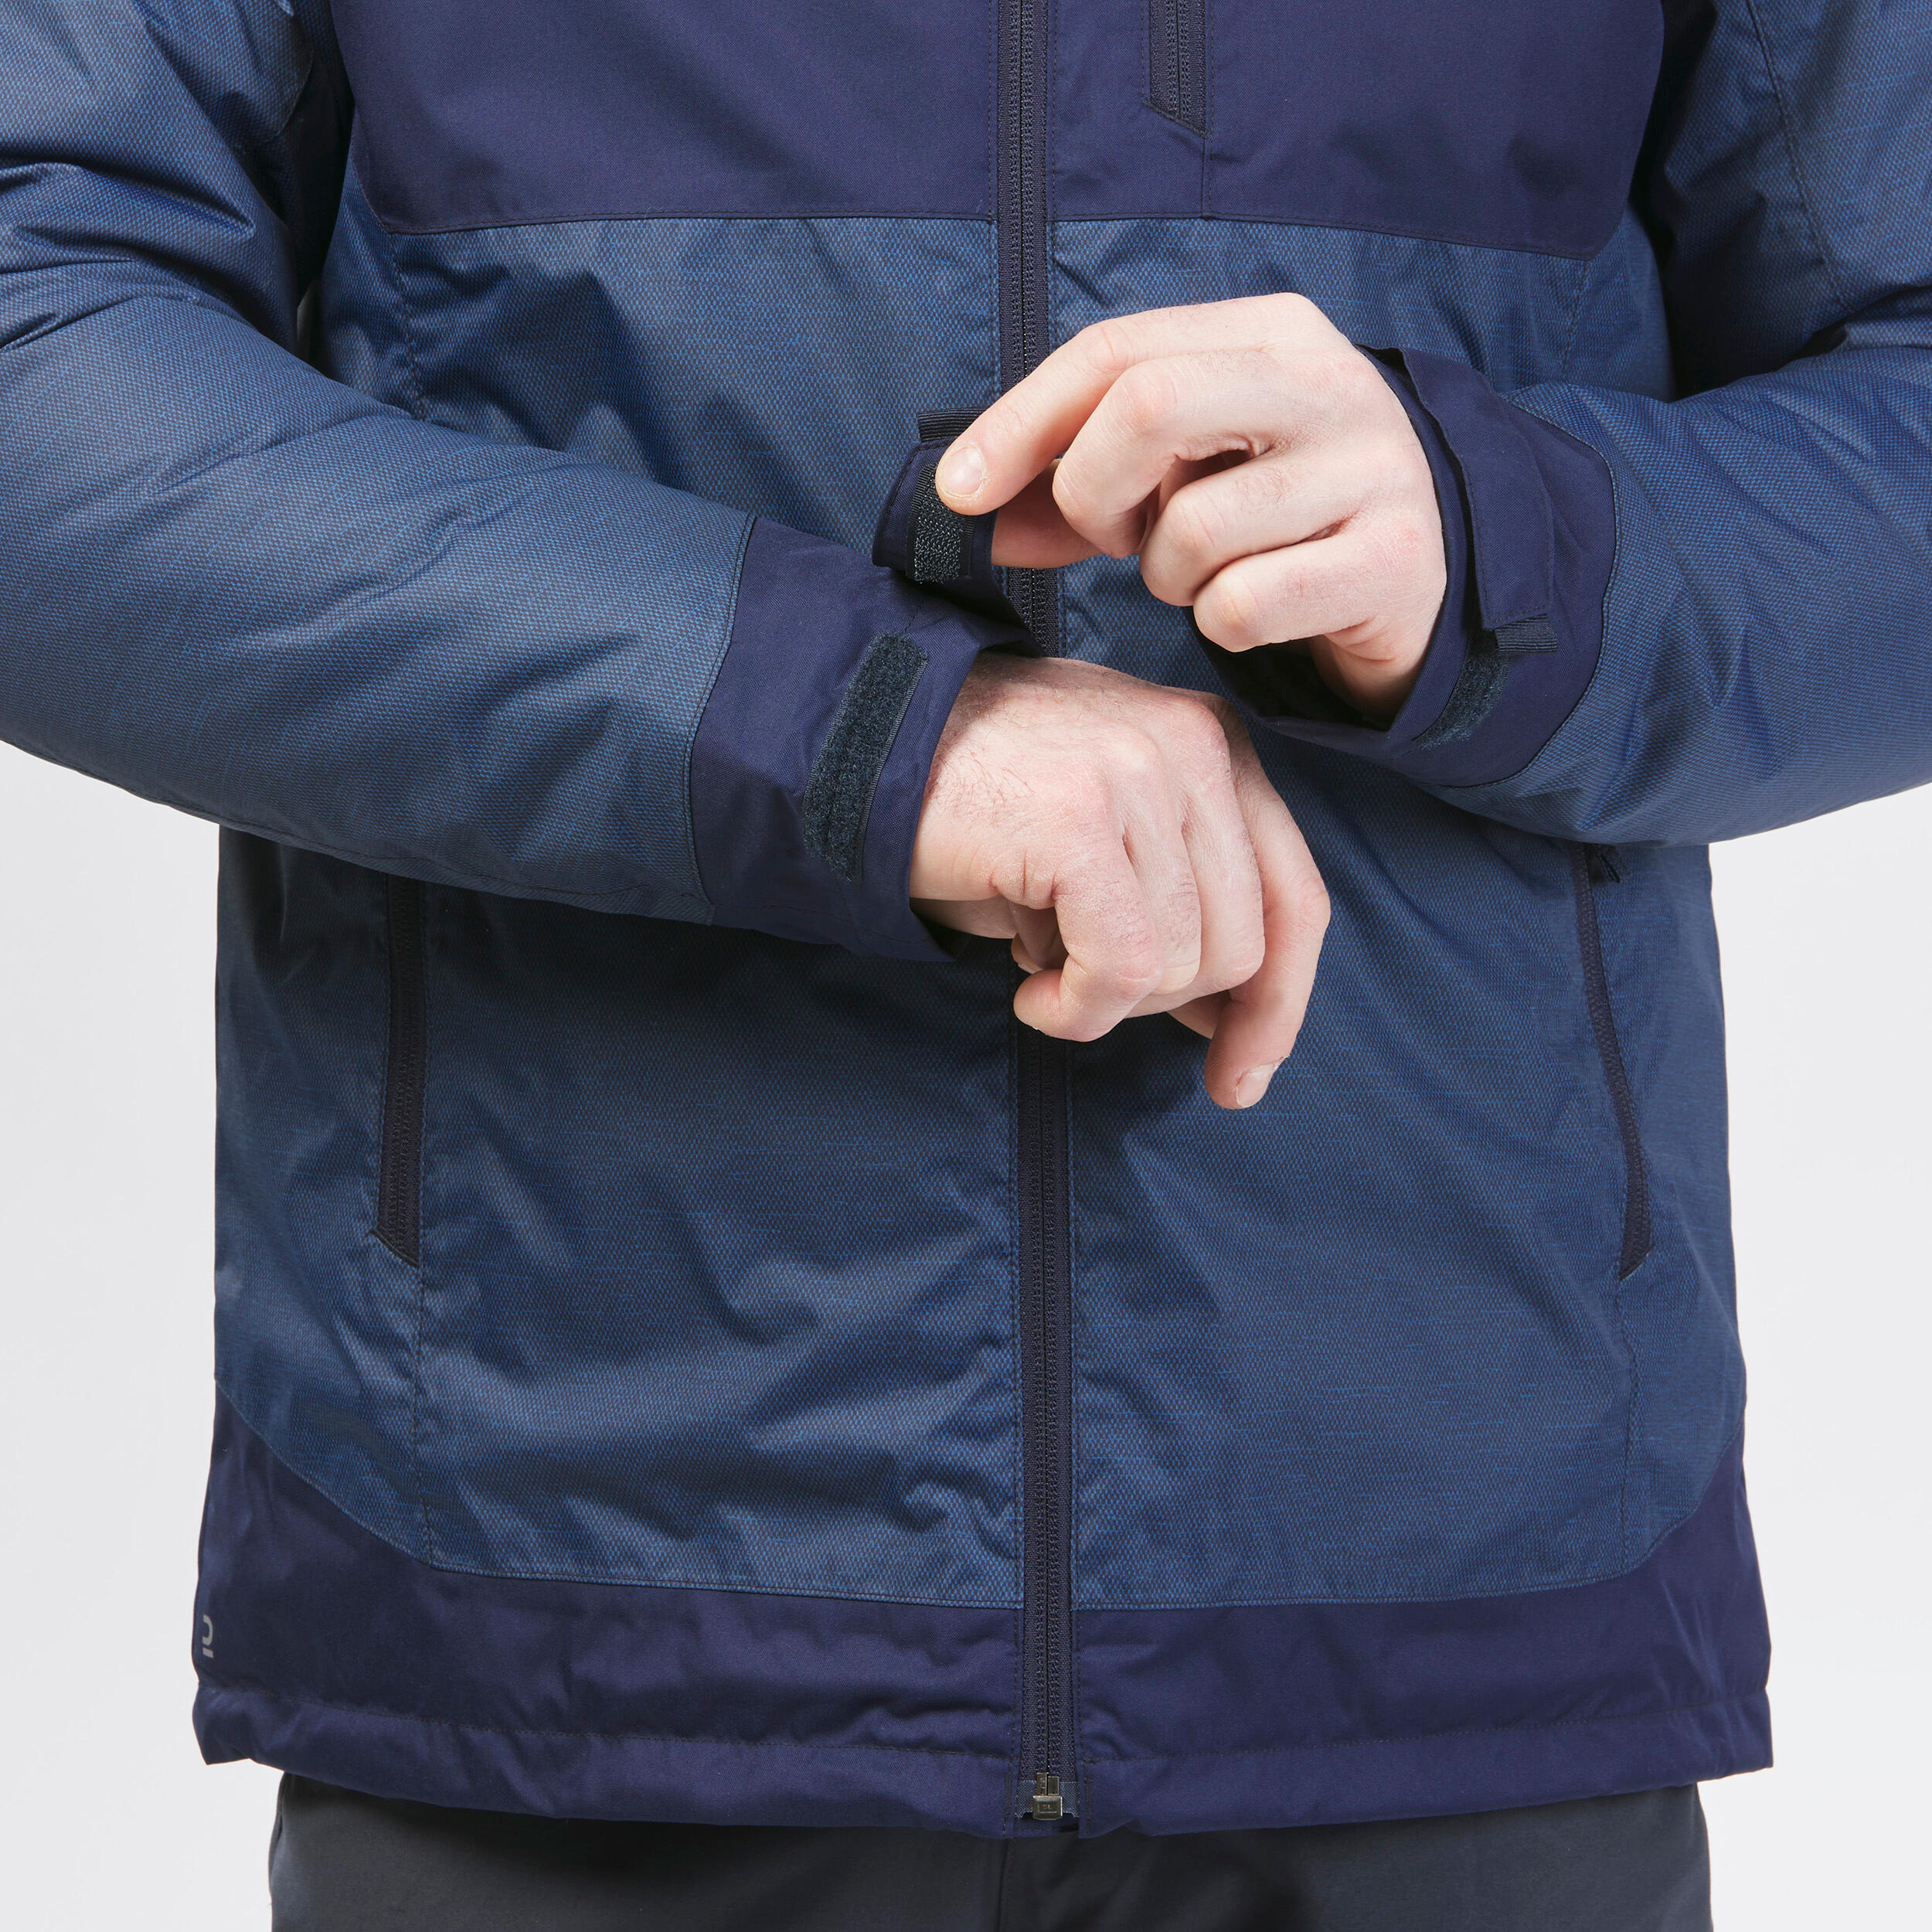 Outerwear & Jackets for Men | Costco